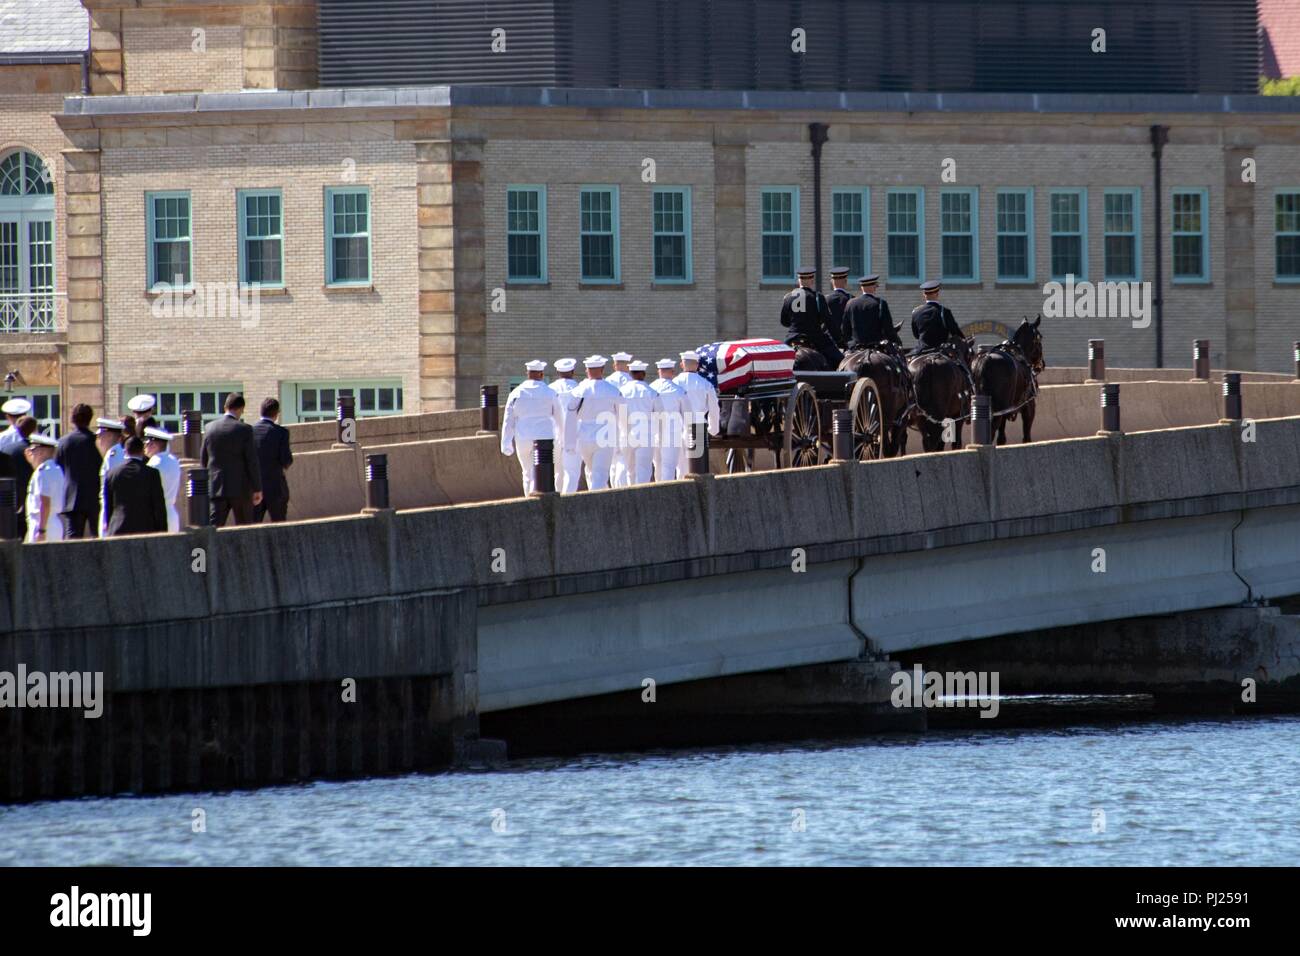 The flag draped casket of Sen. John McCain is carried on a horse-drawn caisson to the United States Naval Academy Cemetery for his burial service September 2, 2018 in Annapolis, Maryland. John S. McCain, III graduated from the United States Naval Academy in 1958. He was a pilot in the United States Navy, a prisoner of war in Vietnam, a Congressmen and Senator and twice presidential candidate. He received numerous awards, including the Silver Star, Legion of Merit, Purple Heart, and Distinguished Flying Cross. Stock Photo